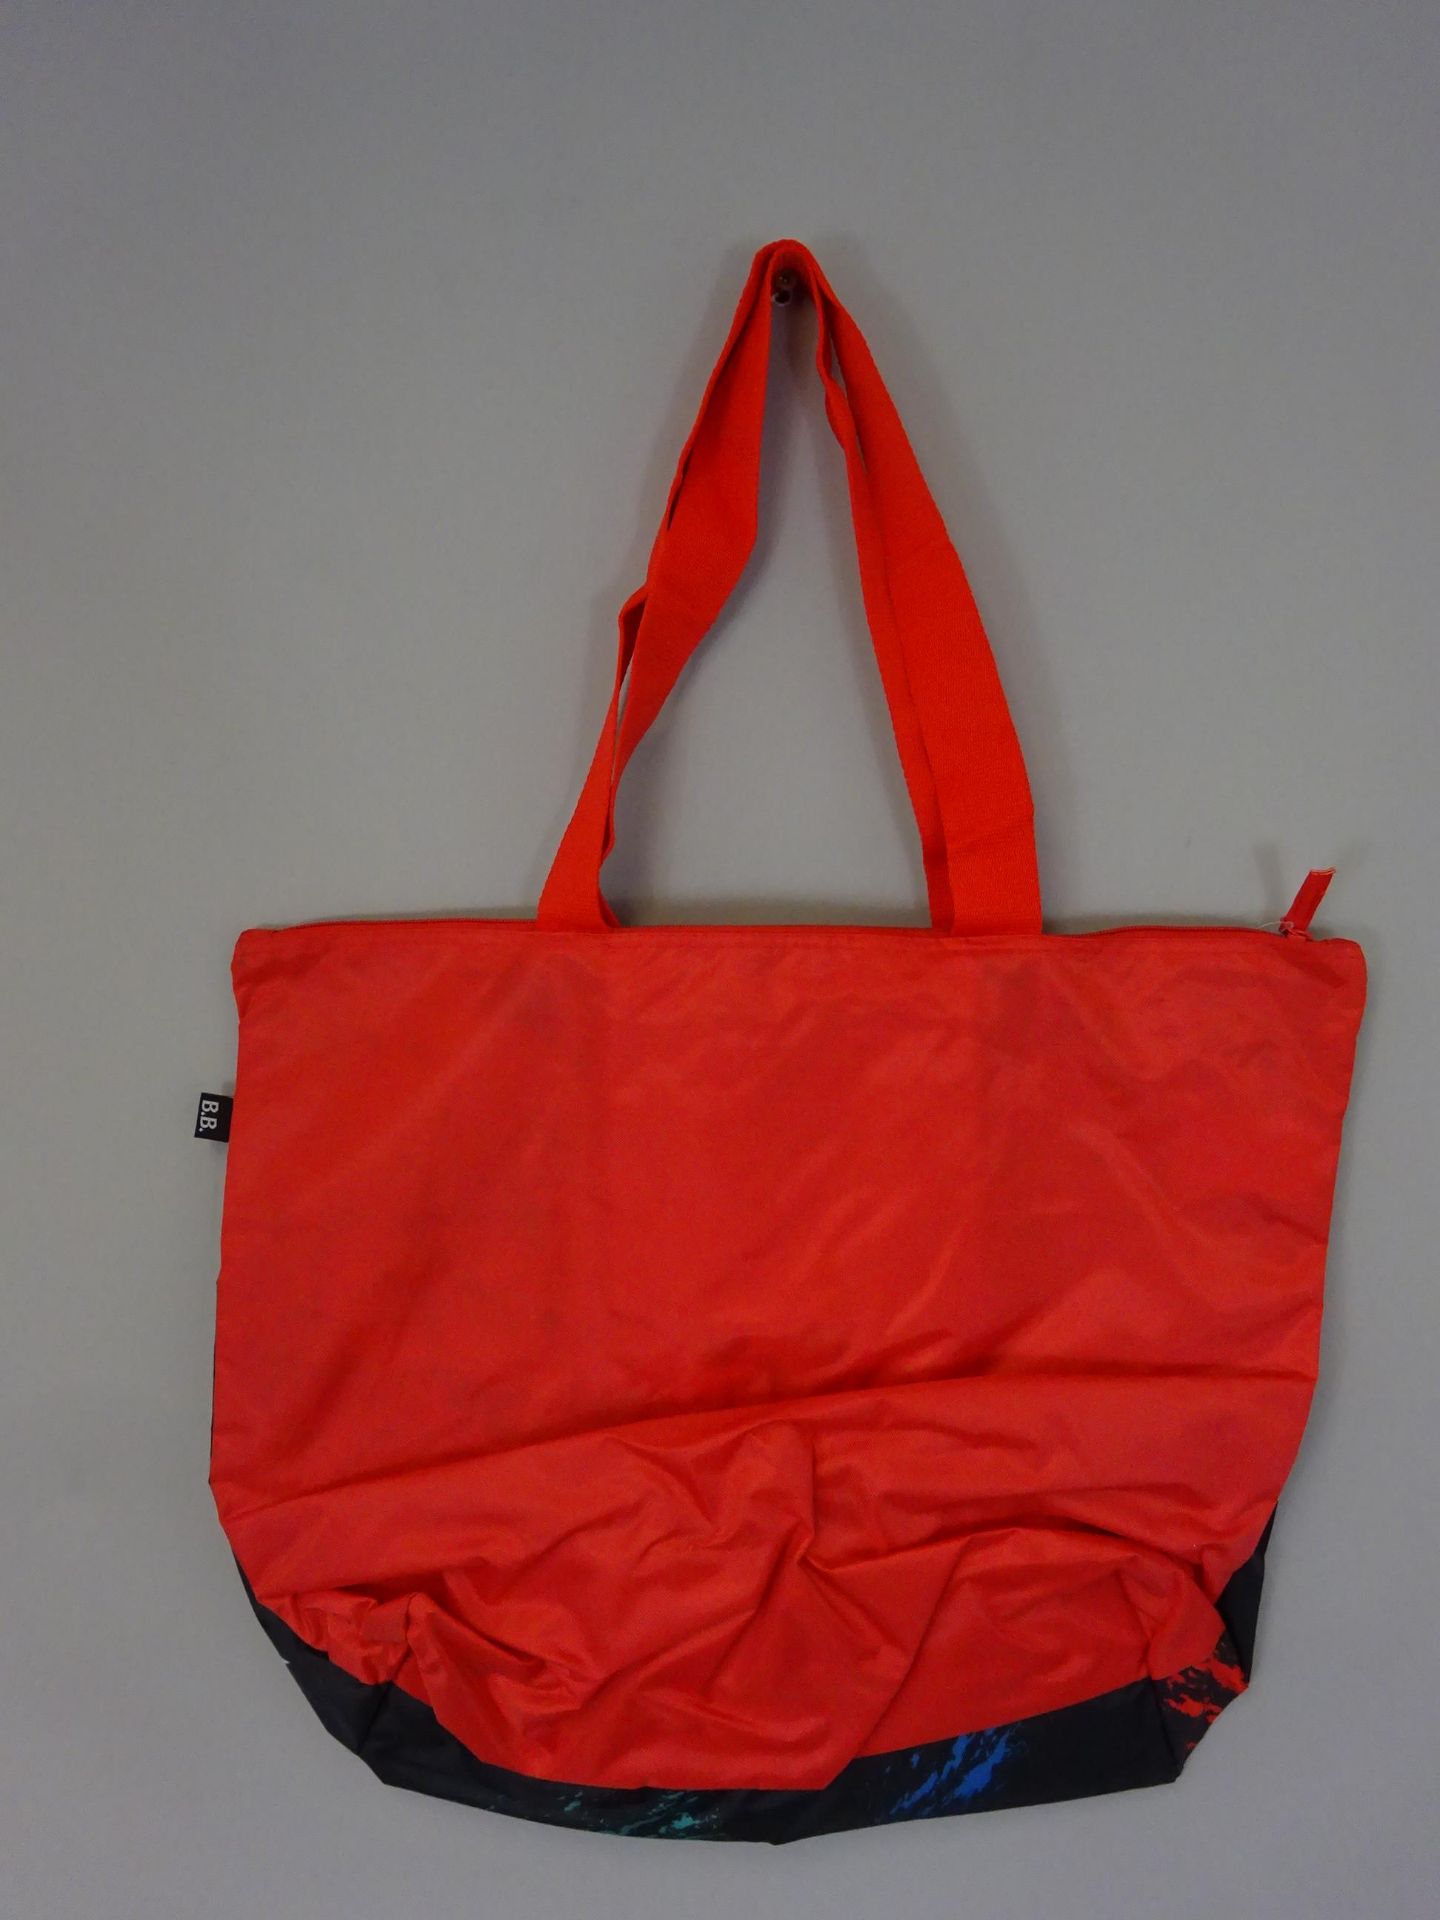 New Black & Red Tattoo Patterend Beach Bag - Image 2 of 2